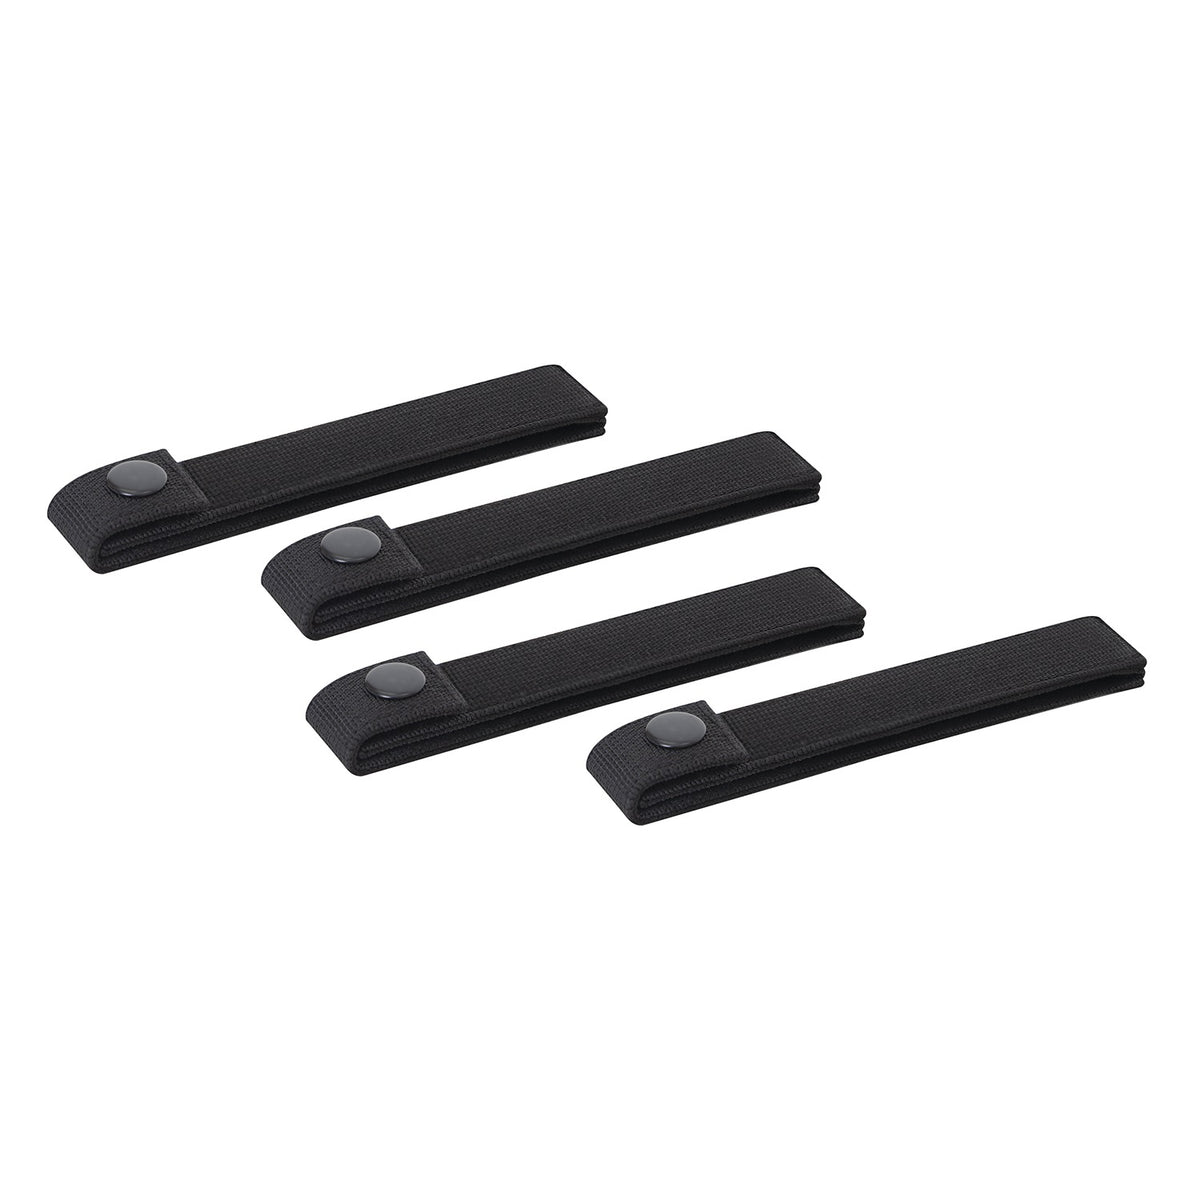 Rothco MOLLE Replacement Straps - 4 Pack Black